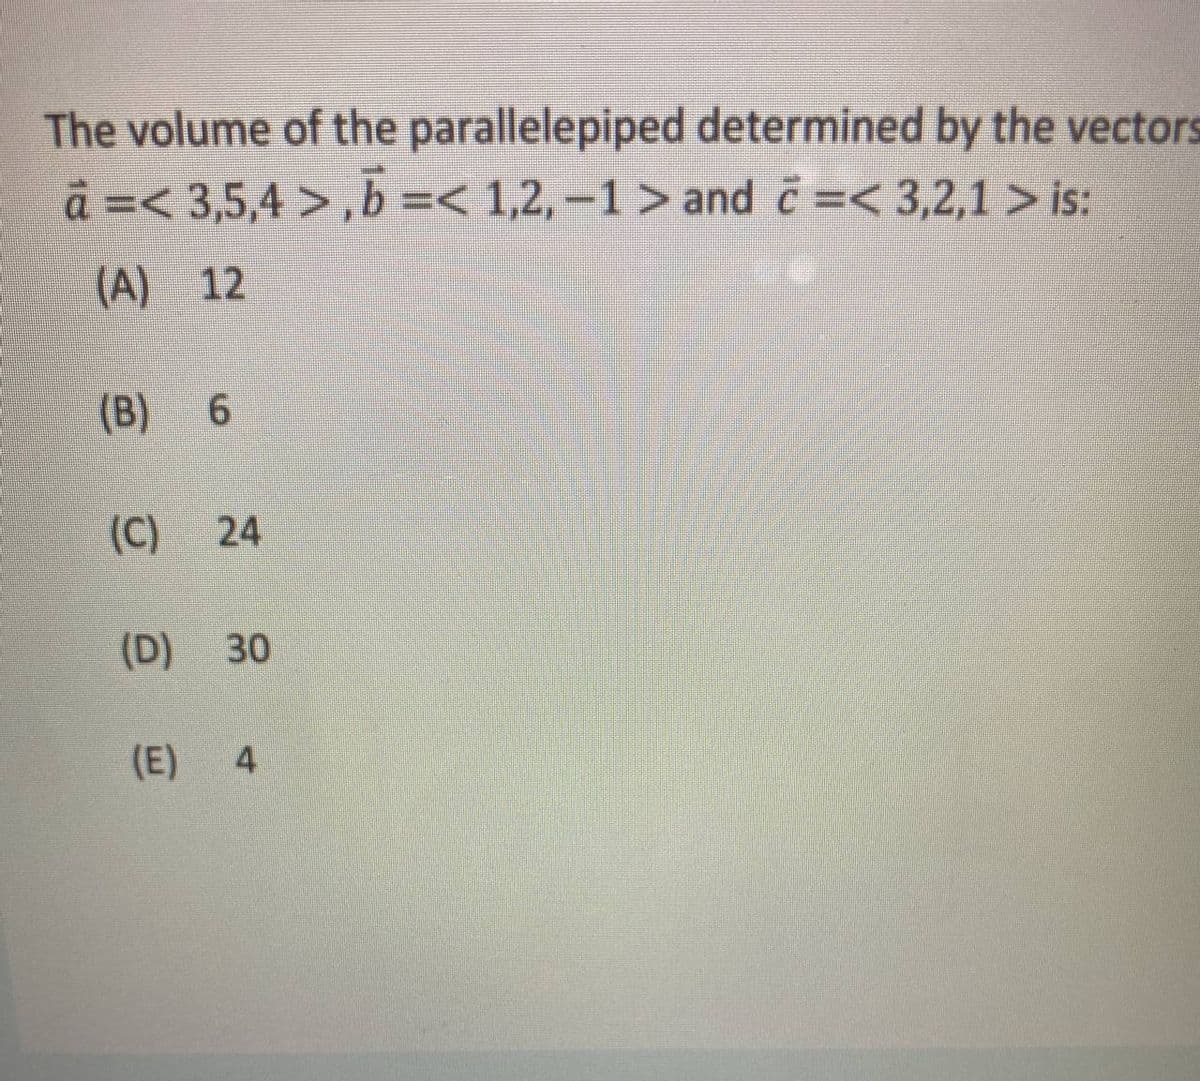 The volume of the parallelepiped determined by the vectors
a =< 3,5,4 >,b =< 1,2, -1> and c=< 3,2,1 > is:
(A) 12
(B)
(C)
24
(D)
30
(E)
4
